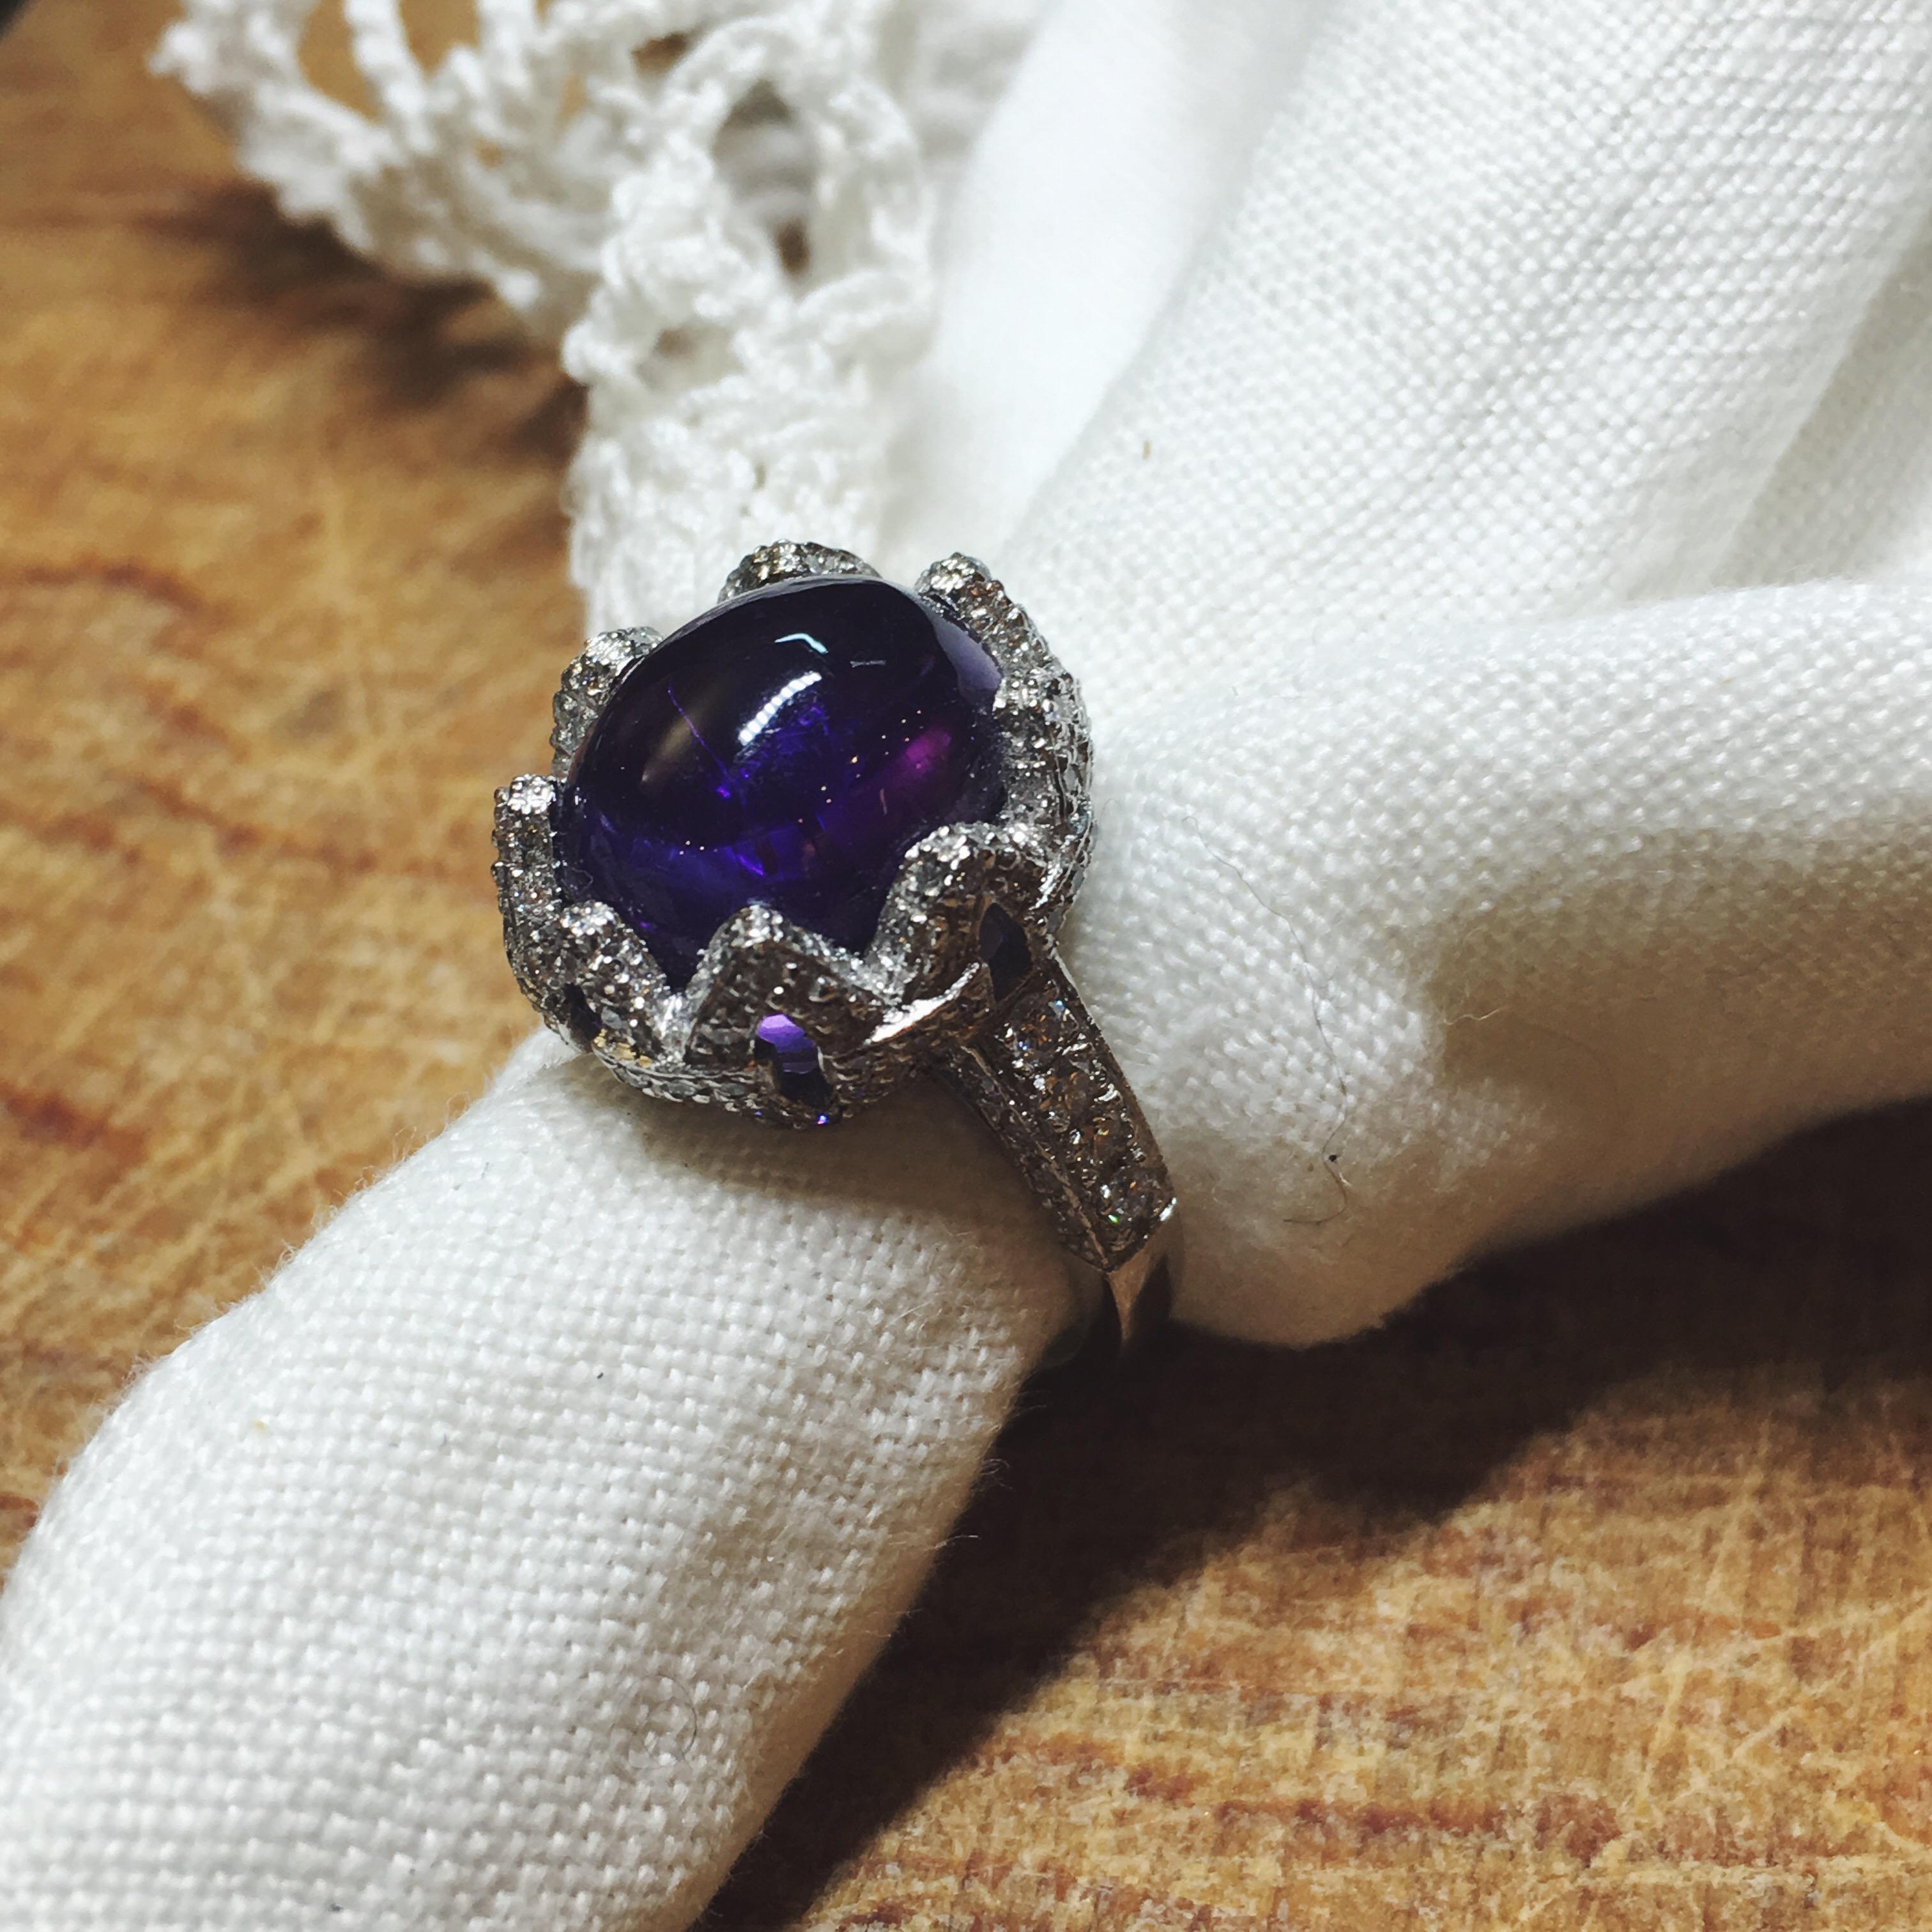 This regal Cabochon Purple Amethyst Cocktail ring is a true beauty. The central Amethyst stone is handcut in our workshop to fit perfectly in the crown of White Diamonds that surround it. This ring is a bespoke made to order piece and can be made